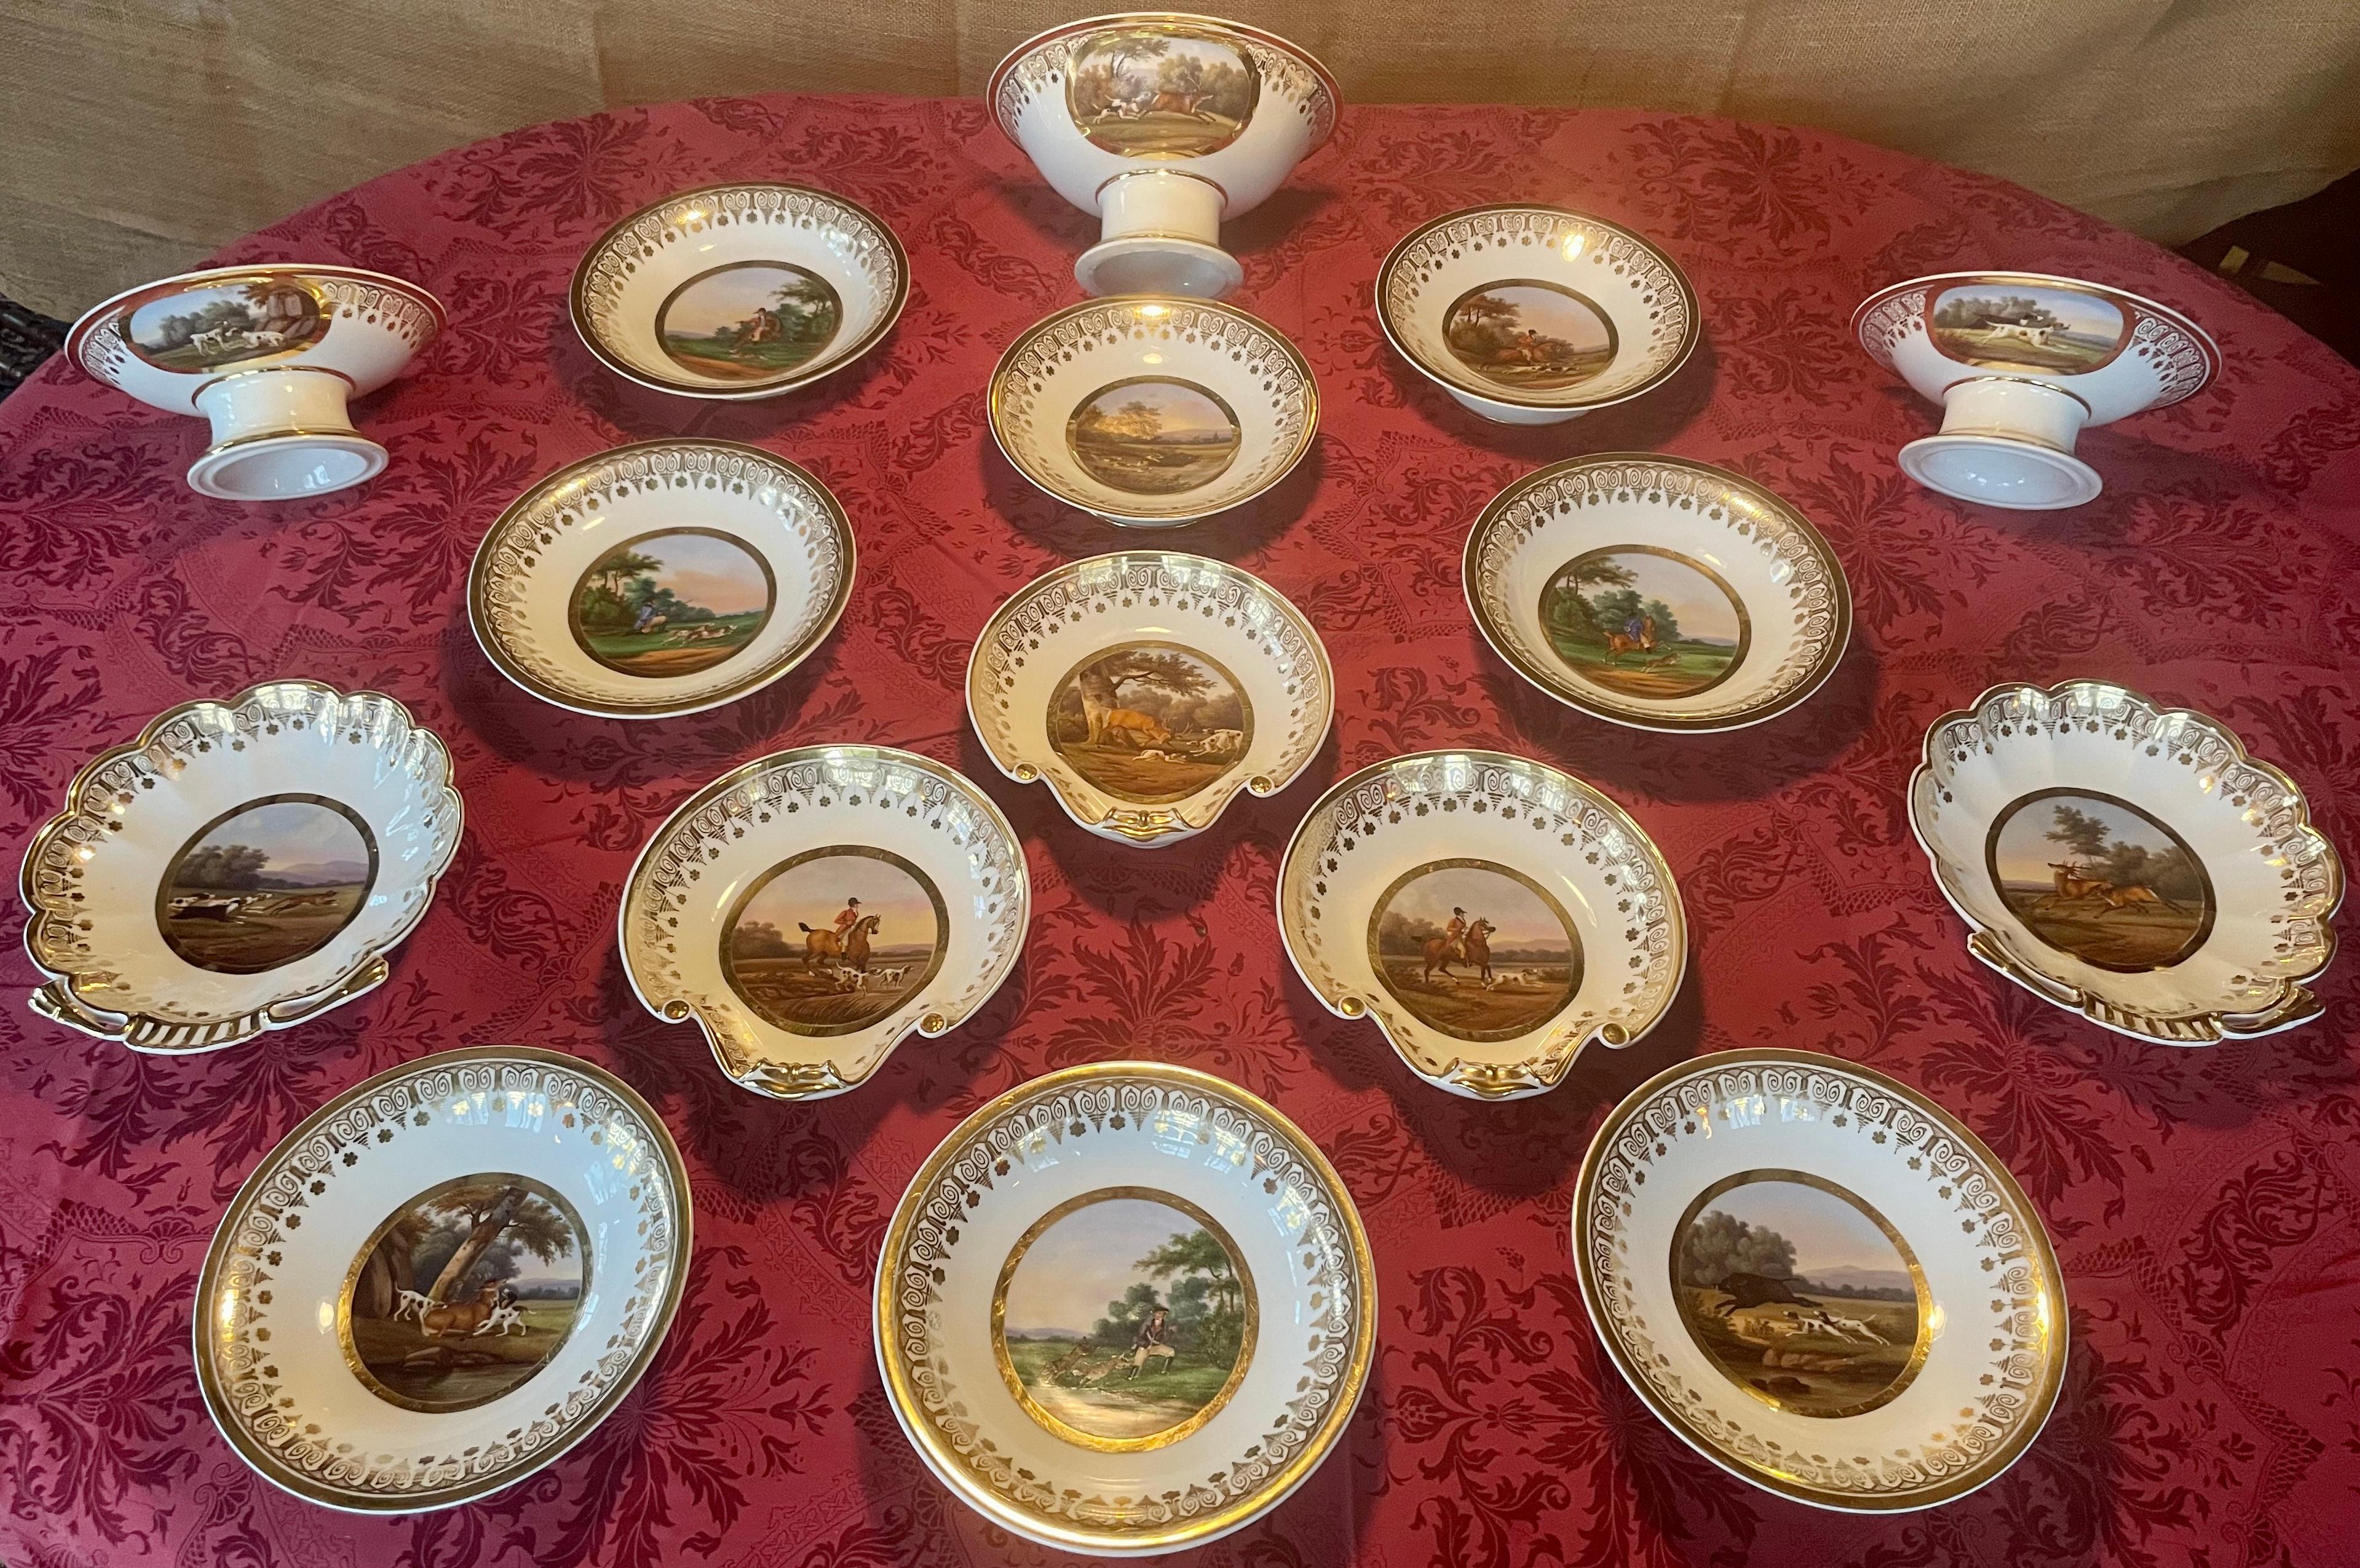 Paris porcelain gilt banded hunting service. Set of sixteen complementary serving dishes with hunt paintings attributed to Jacques François Joseph Swebach, a painter for Serves porcelain as well as Royal Russian Porcelain manufactory; his work found